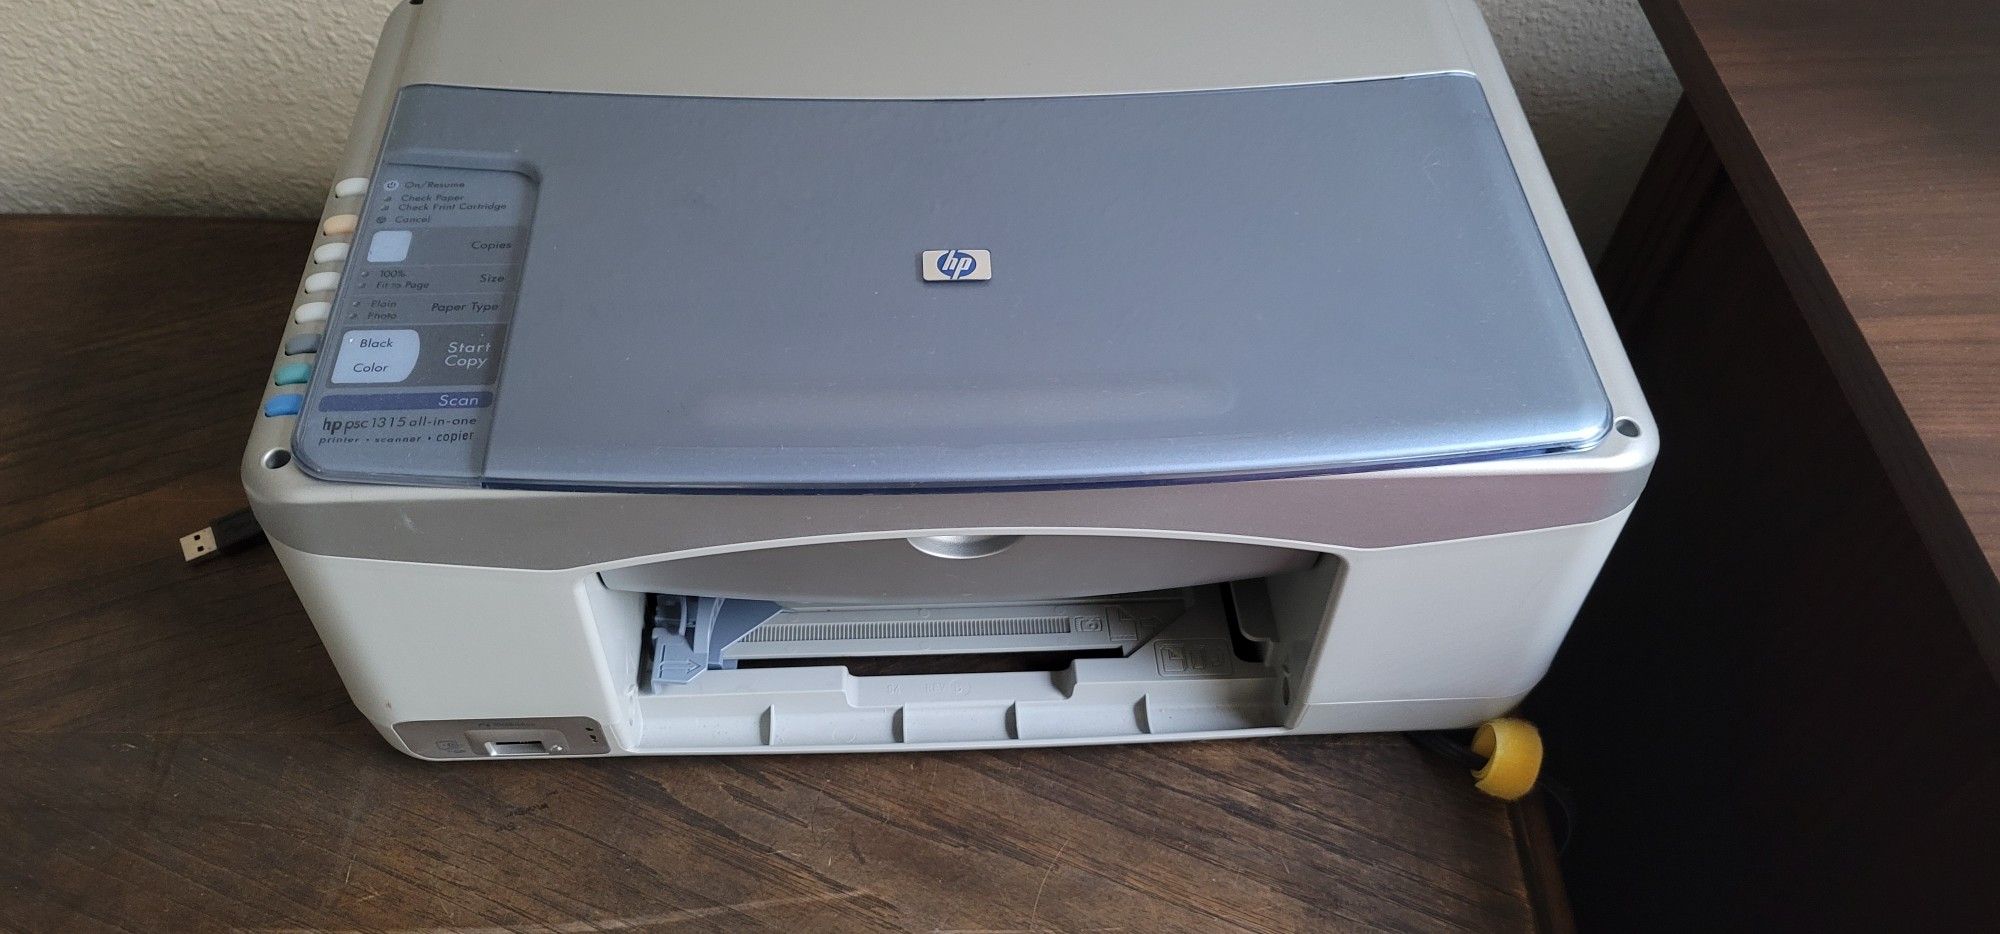 Printer with modem and Router